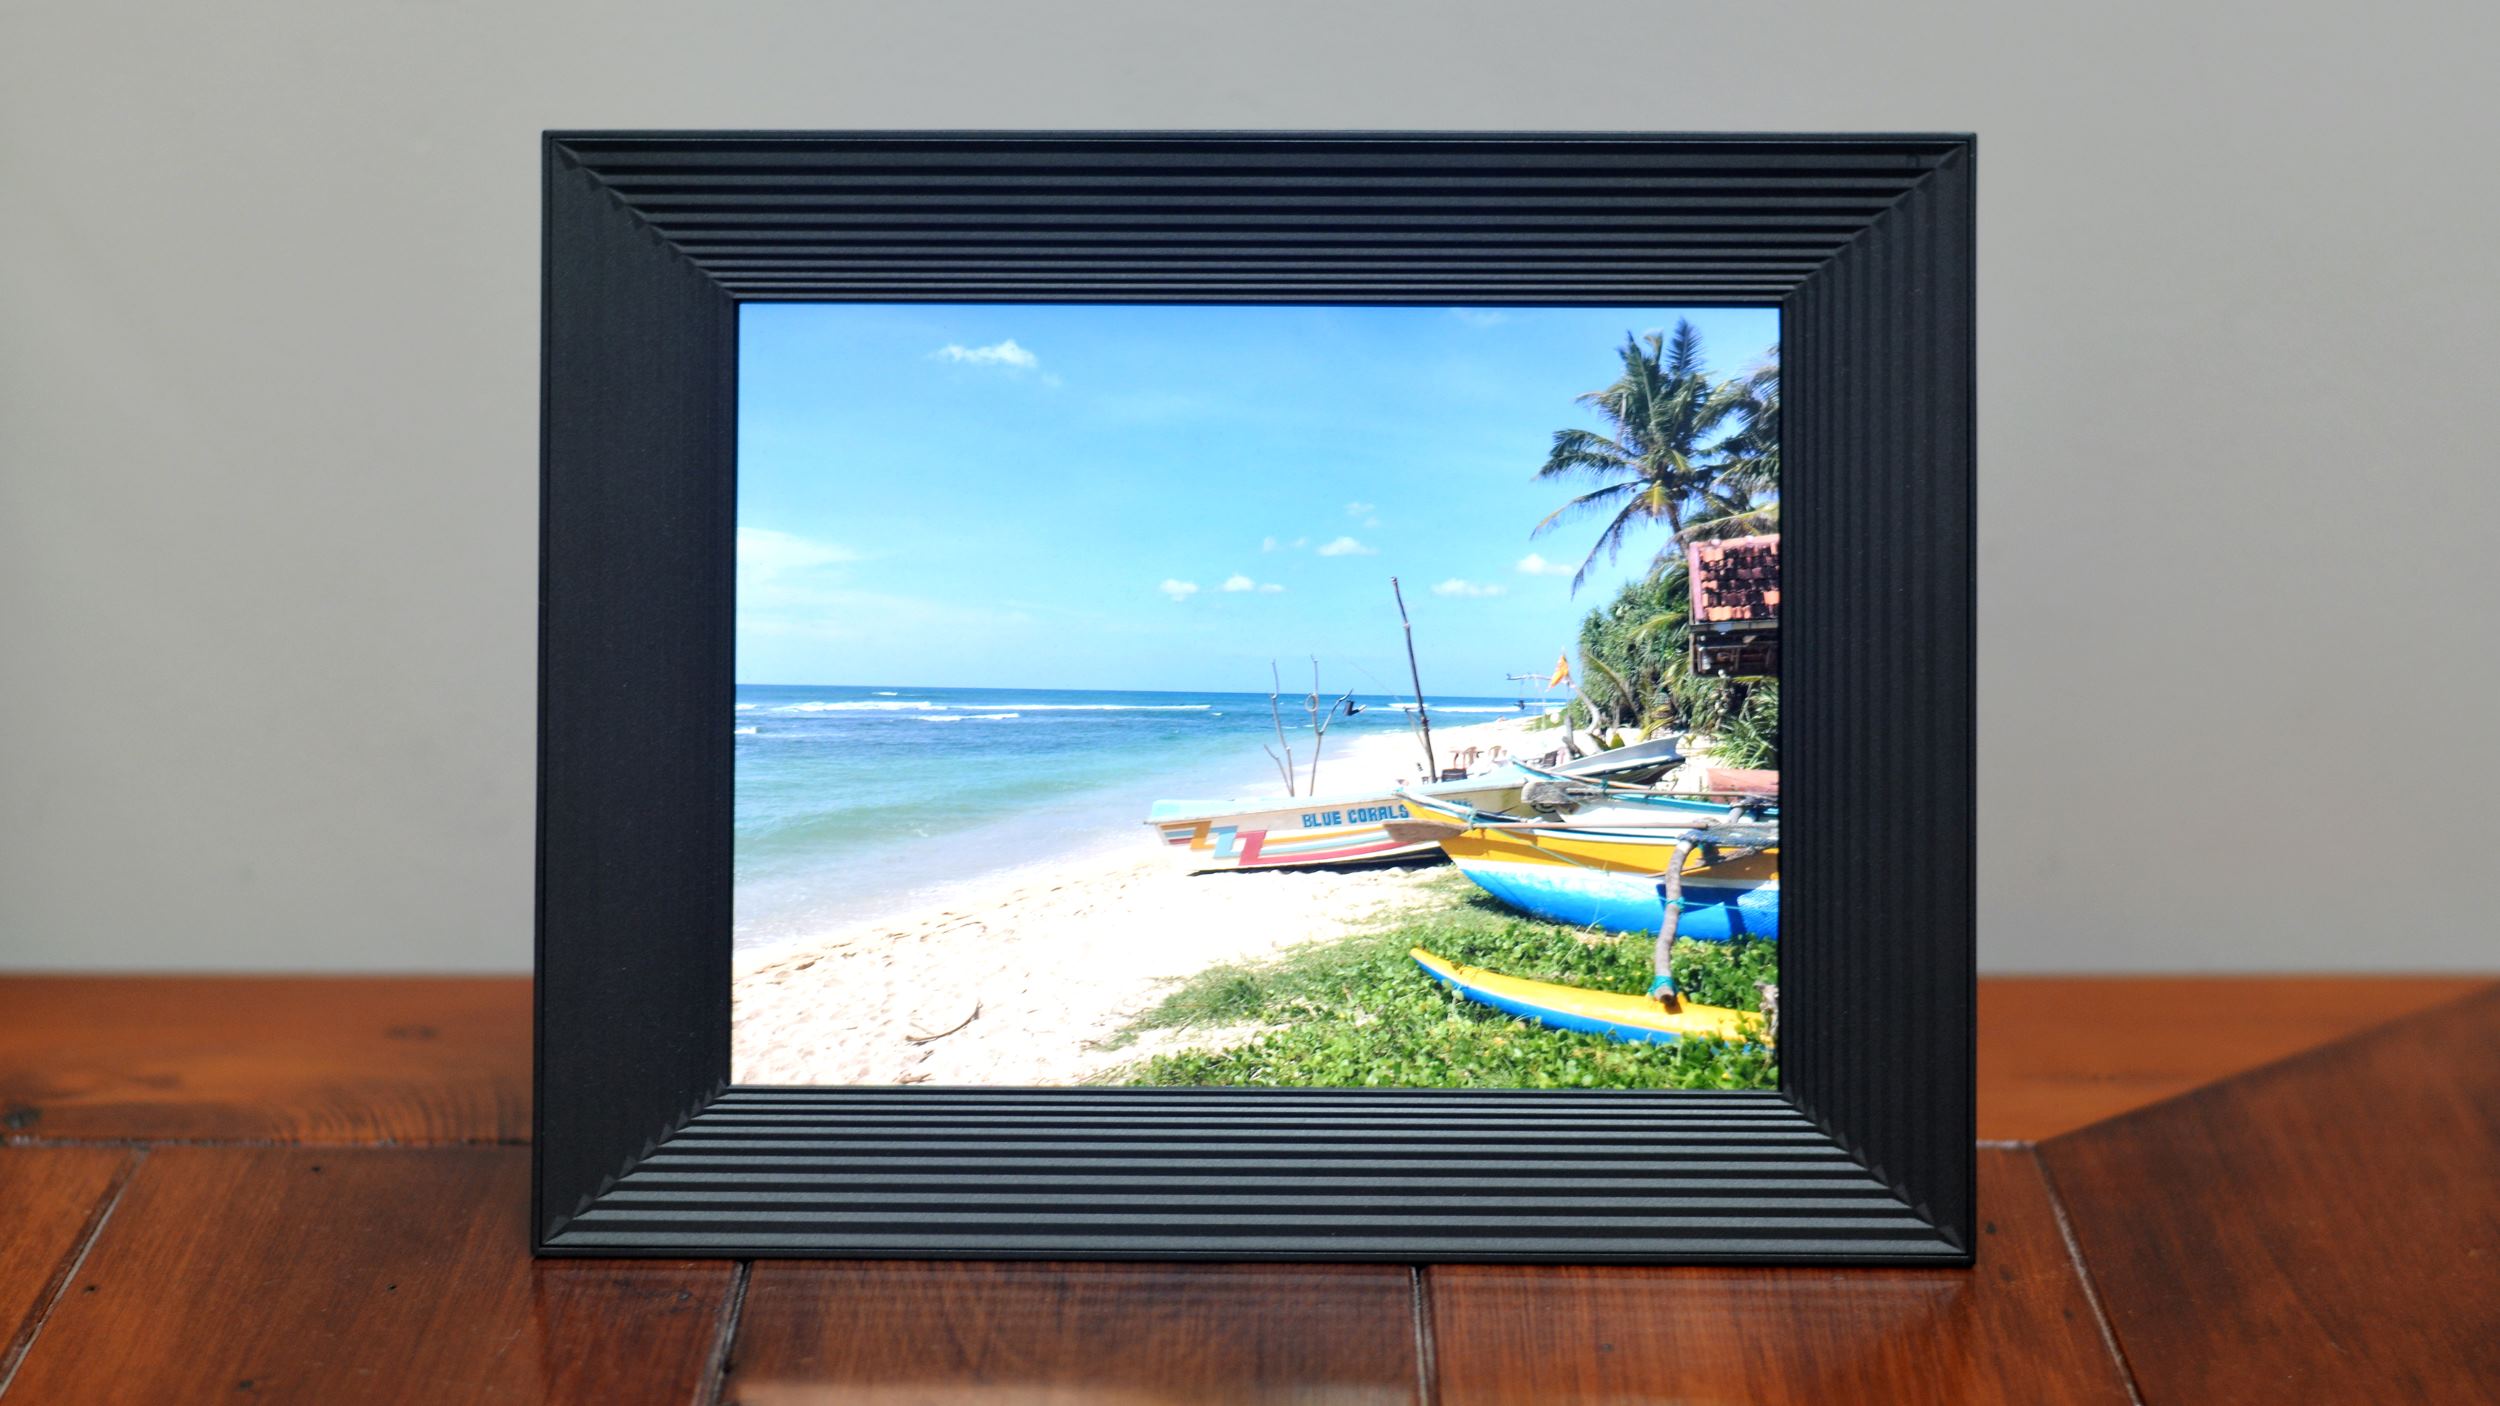 Digital Picture Frame Where You Can Send Pictures